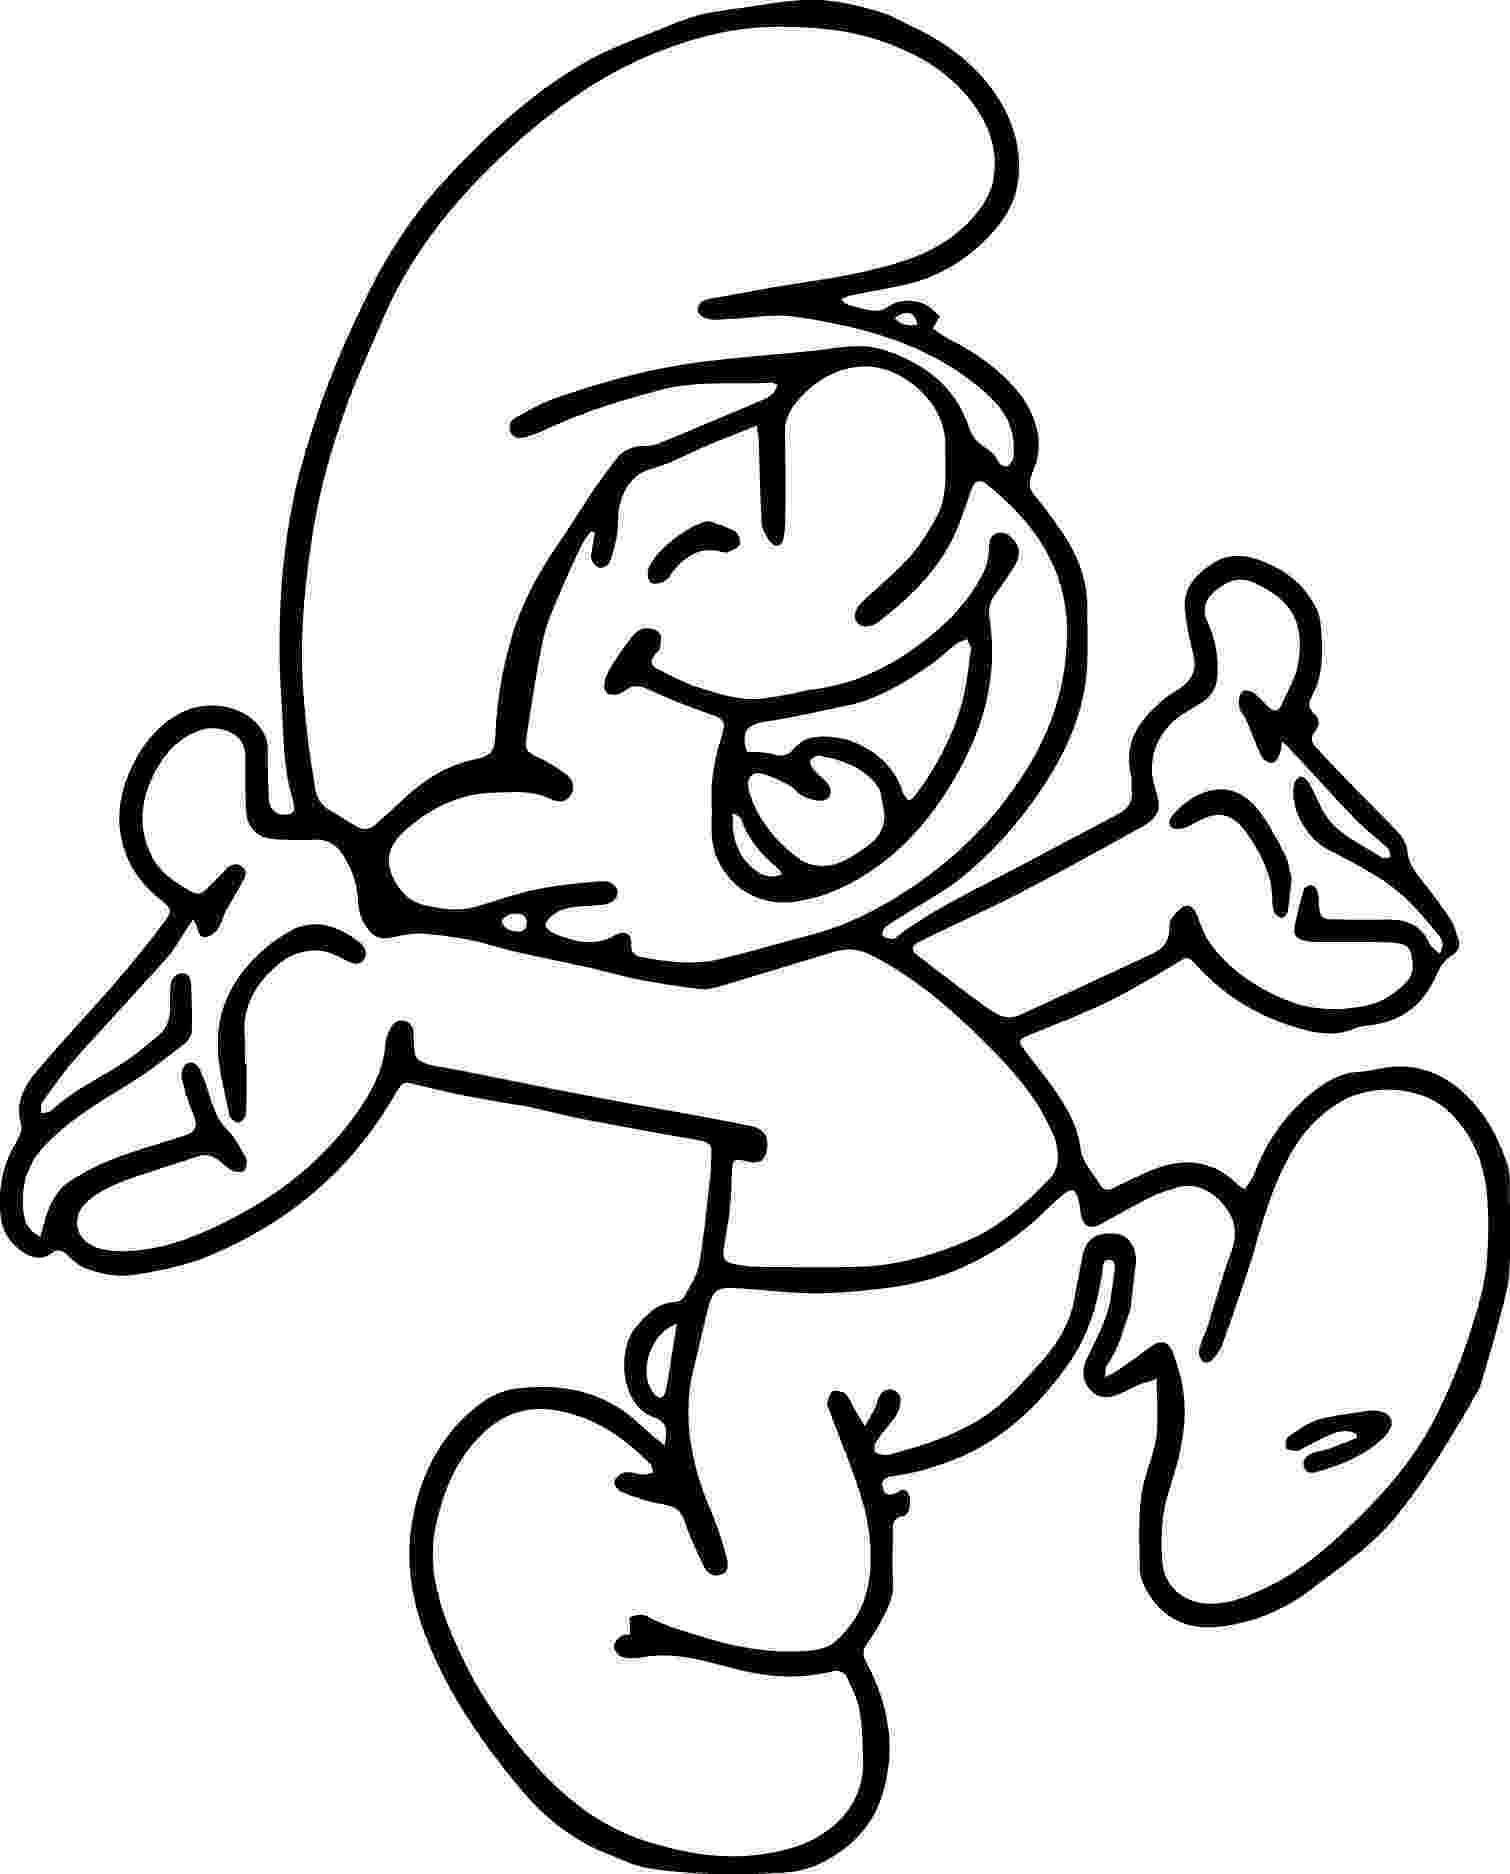 smurf pictures running happy smurf coloring page wecoloringpagecom smurf pictures 